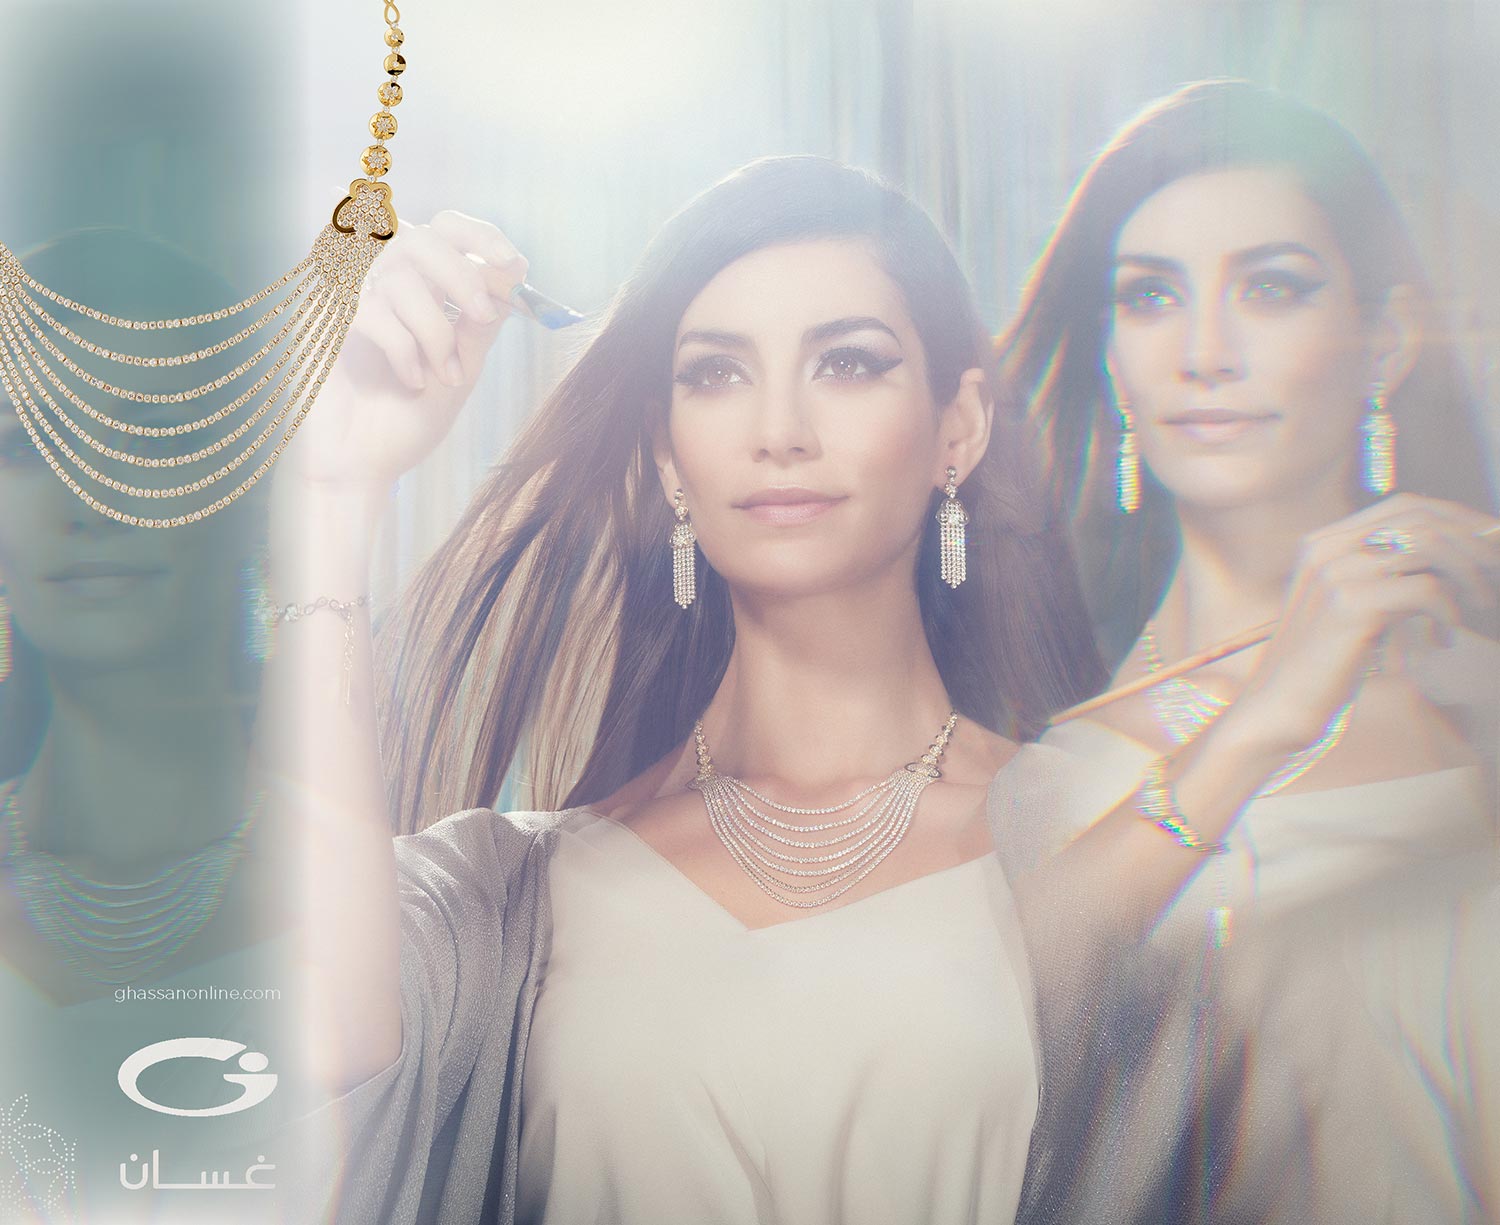 Ghassan Jewellery Campaign